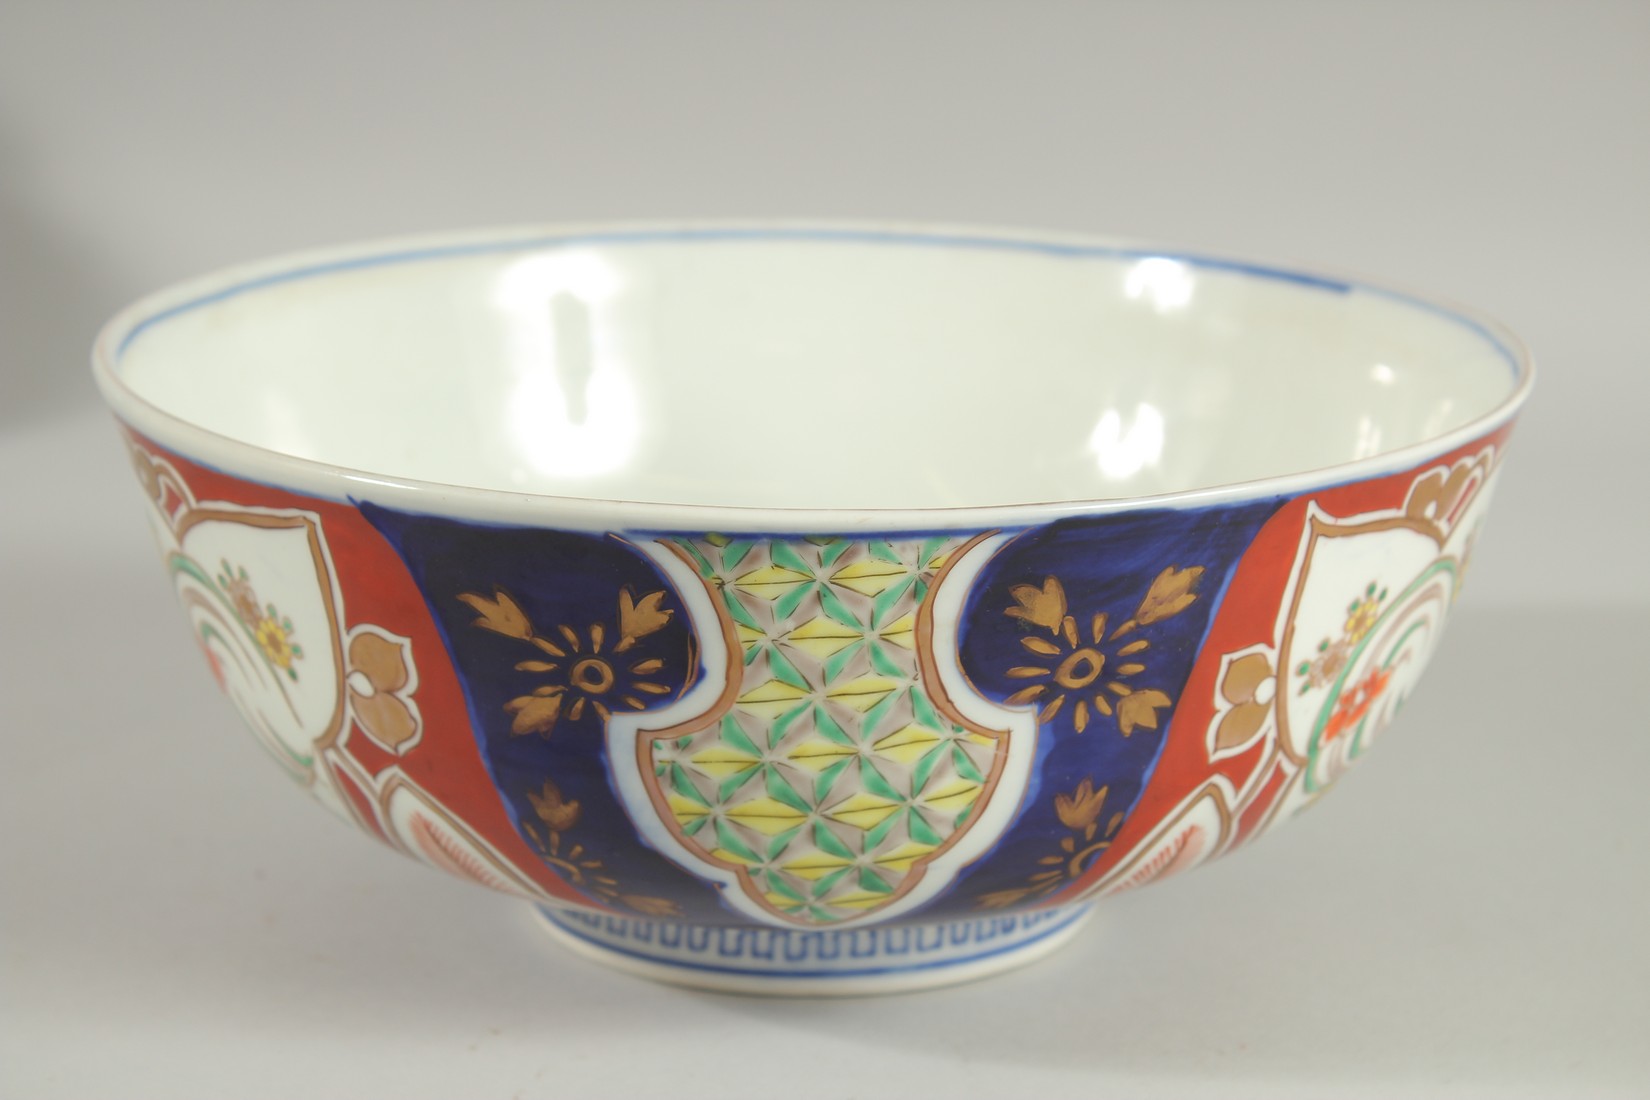 A LARGE JAPANESE IMARI PORCELAIN BOWL, painted with various foliate motifs and gilt highlights, - Image 2 of 4